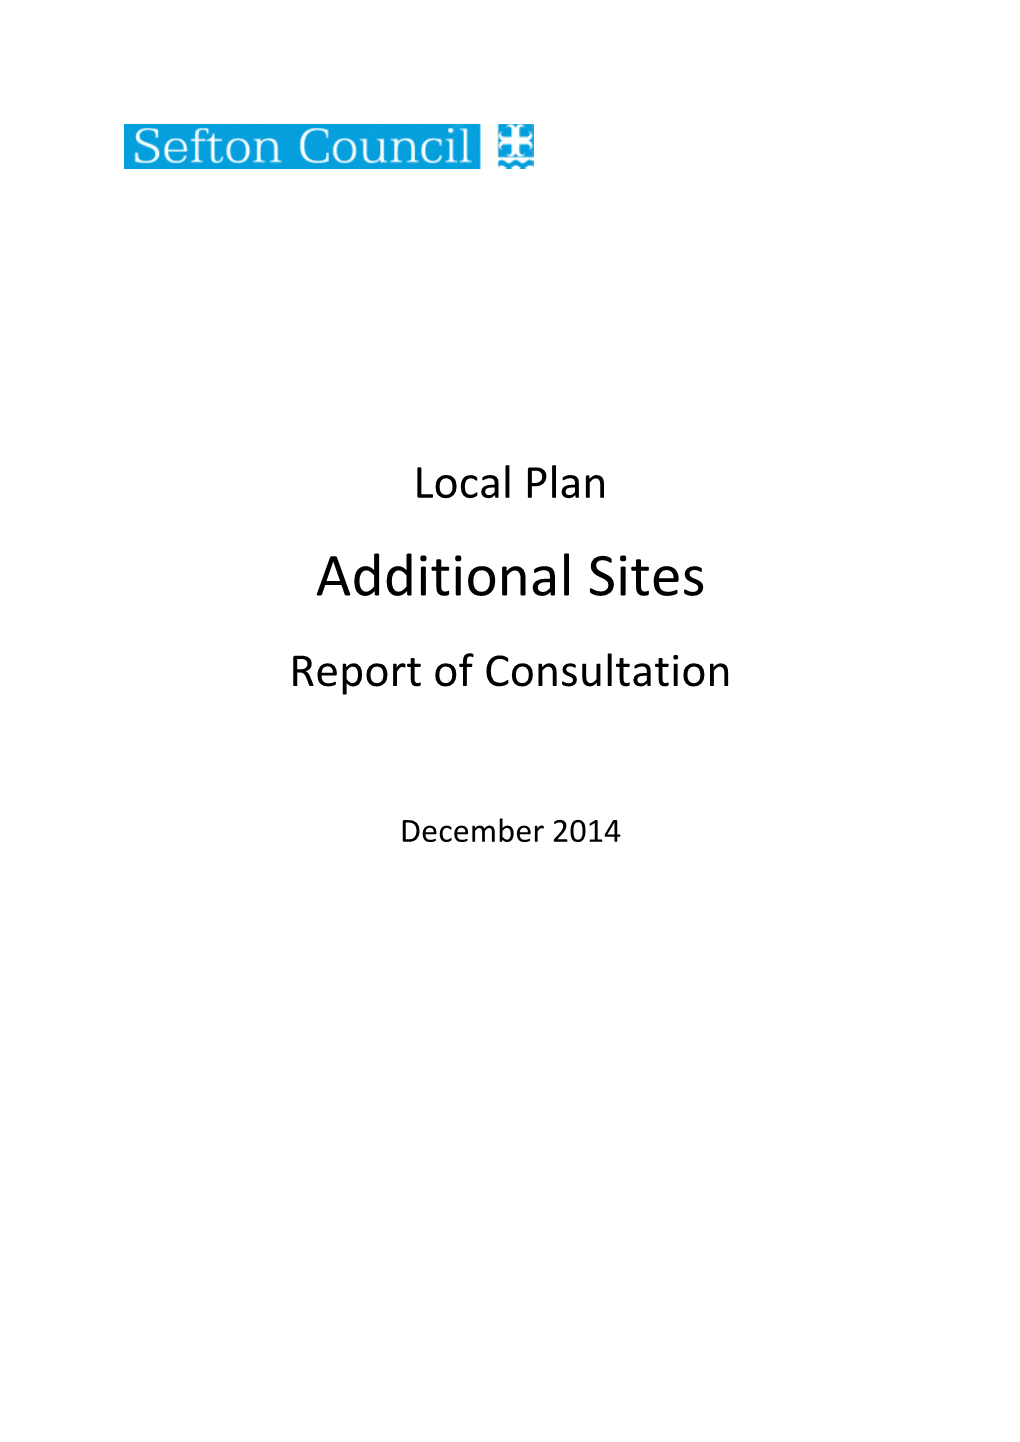 Additional Sites Report of Consultation